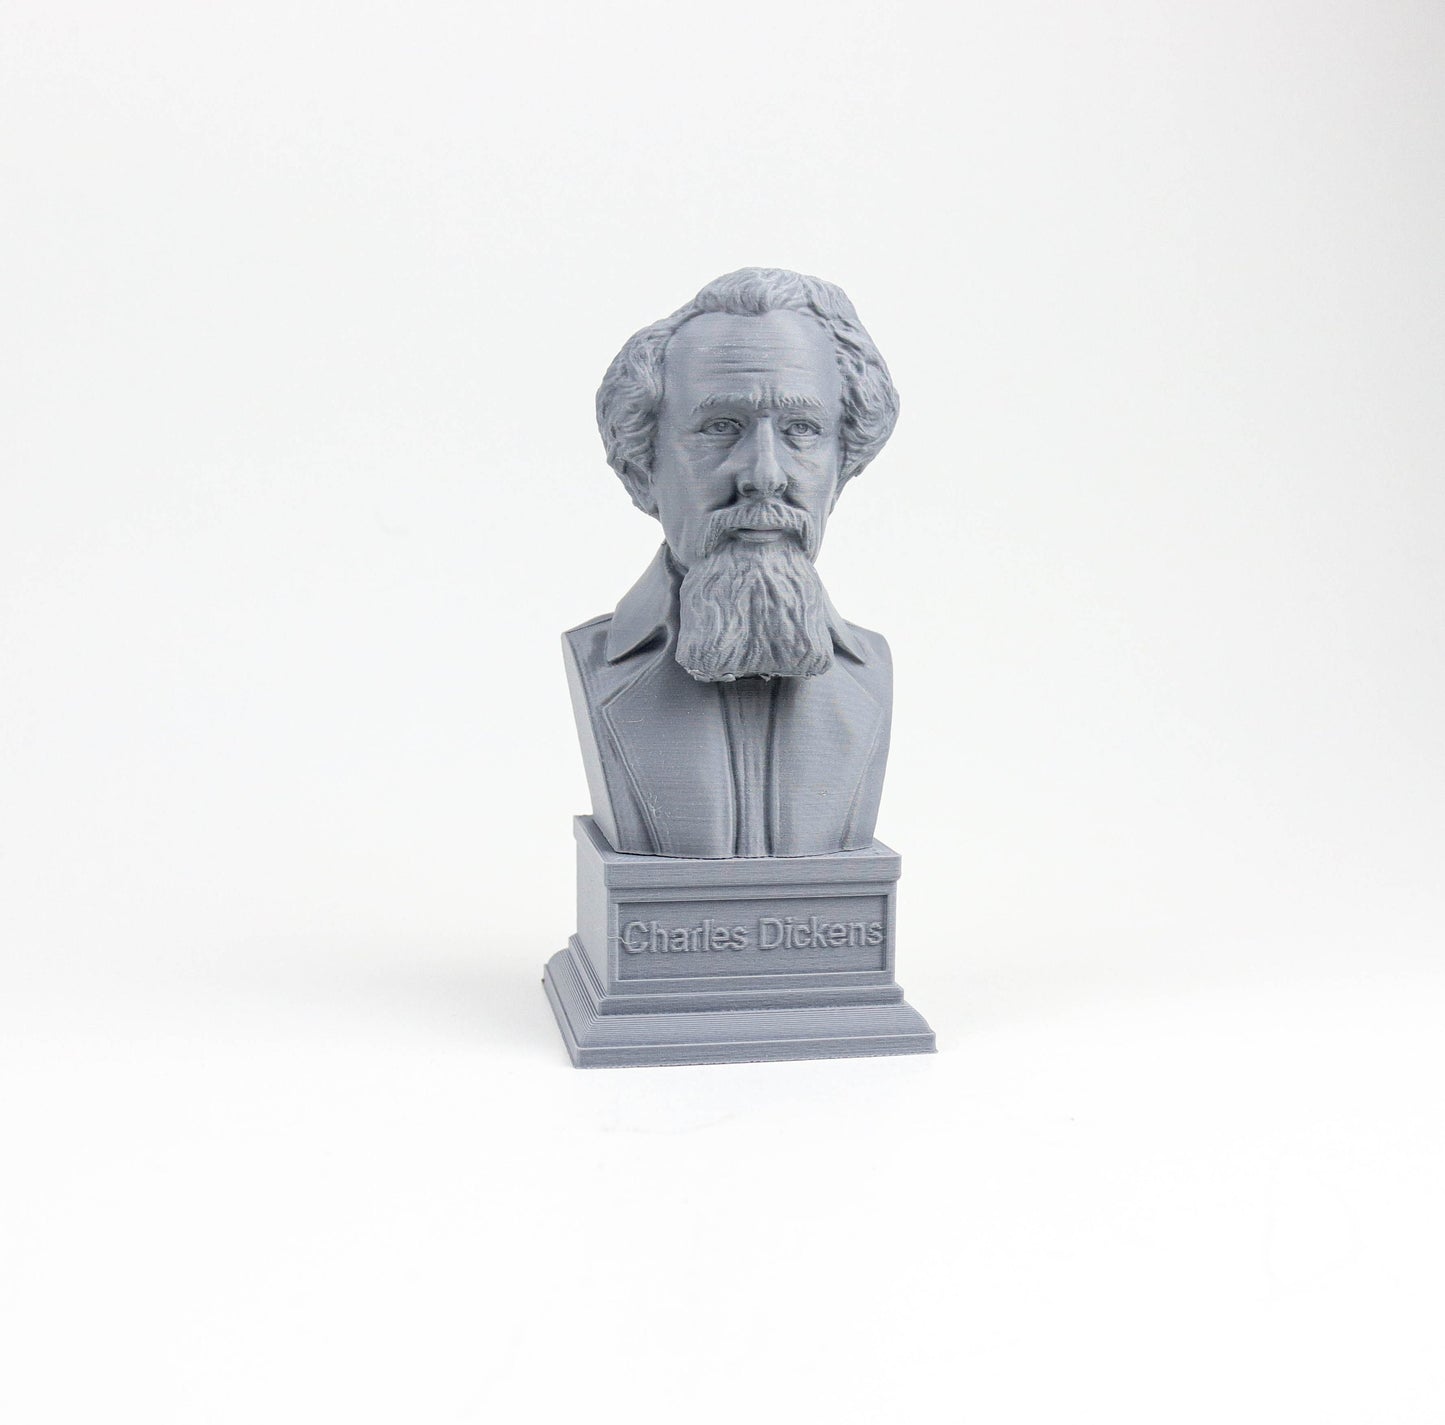 Charles Dickens Bust, English Writer and Social Critic Statue